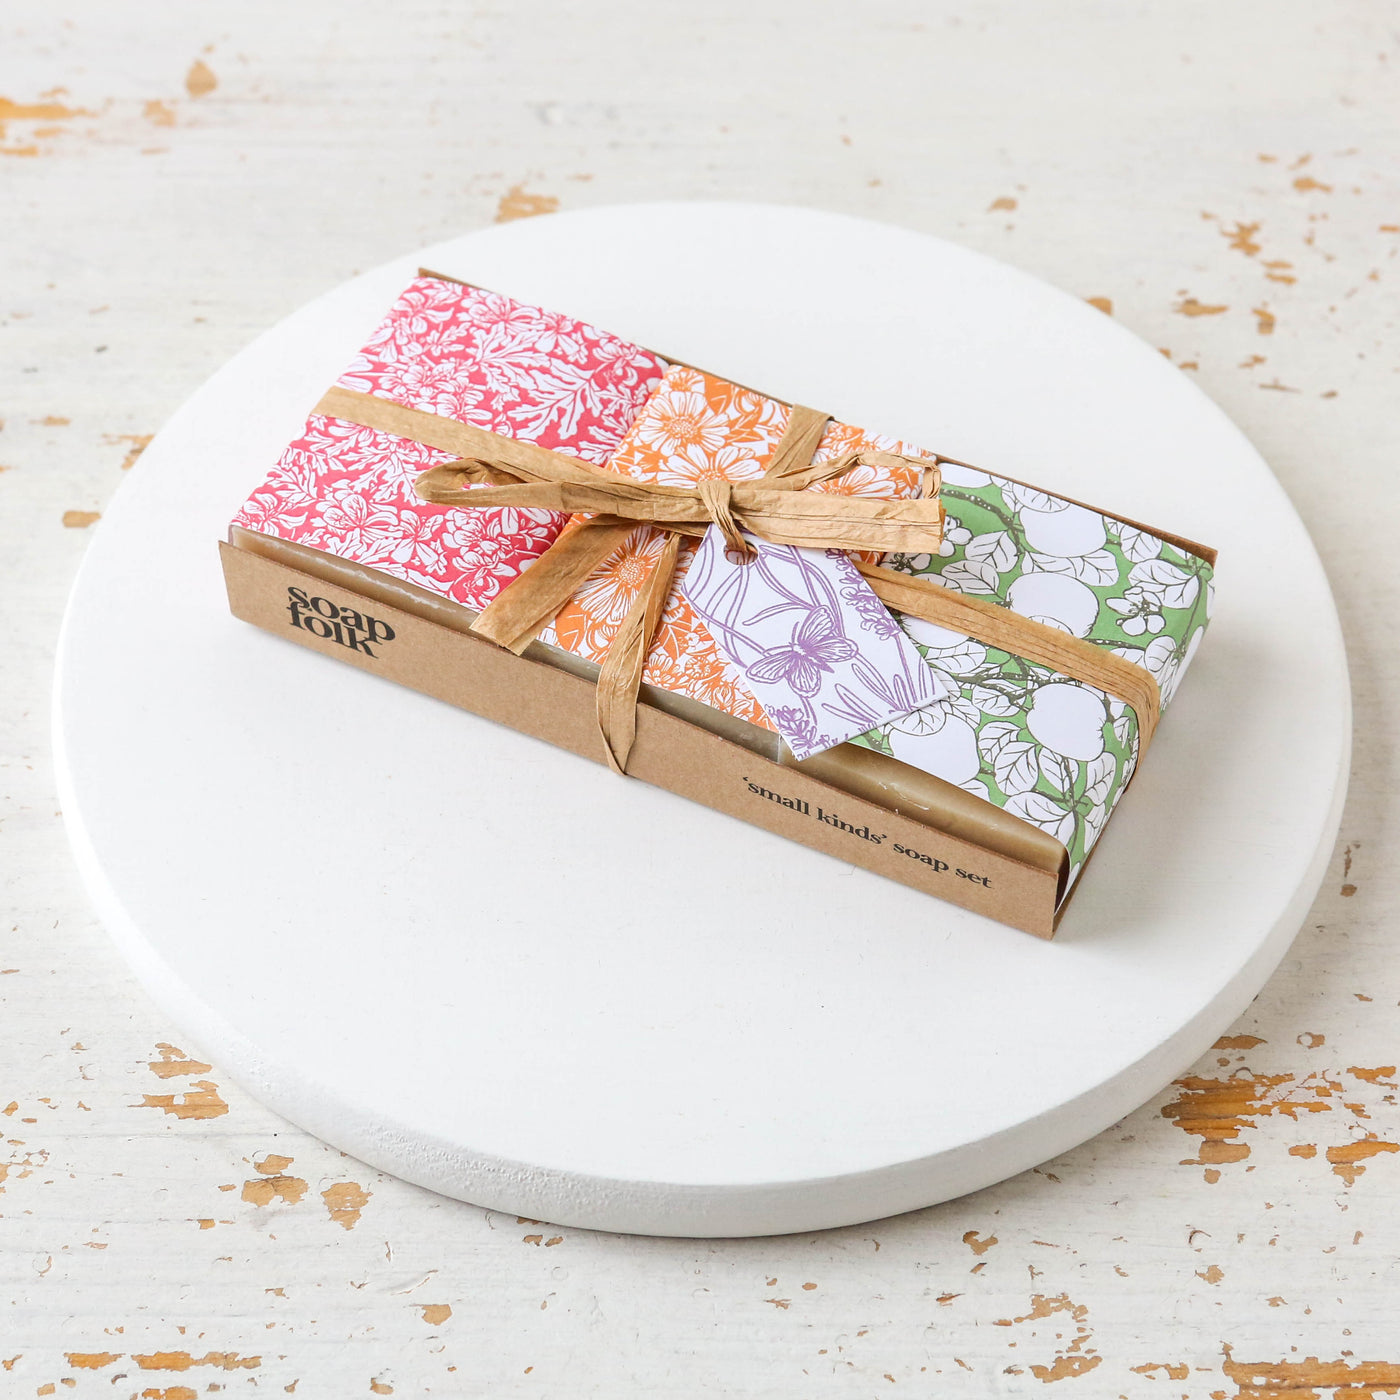 Small Kinds of Soap Set - 3 Bars